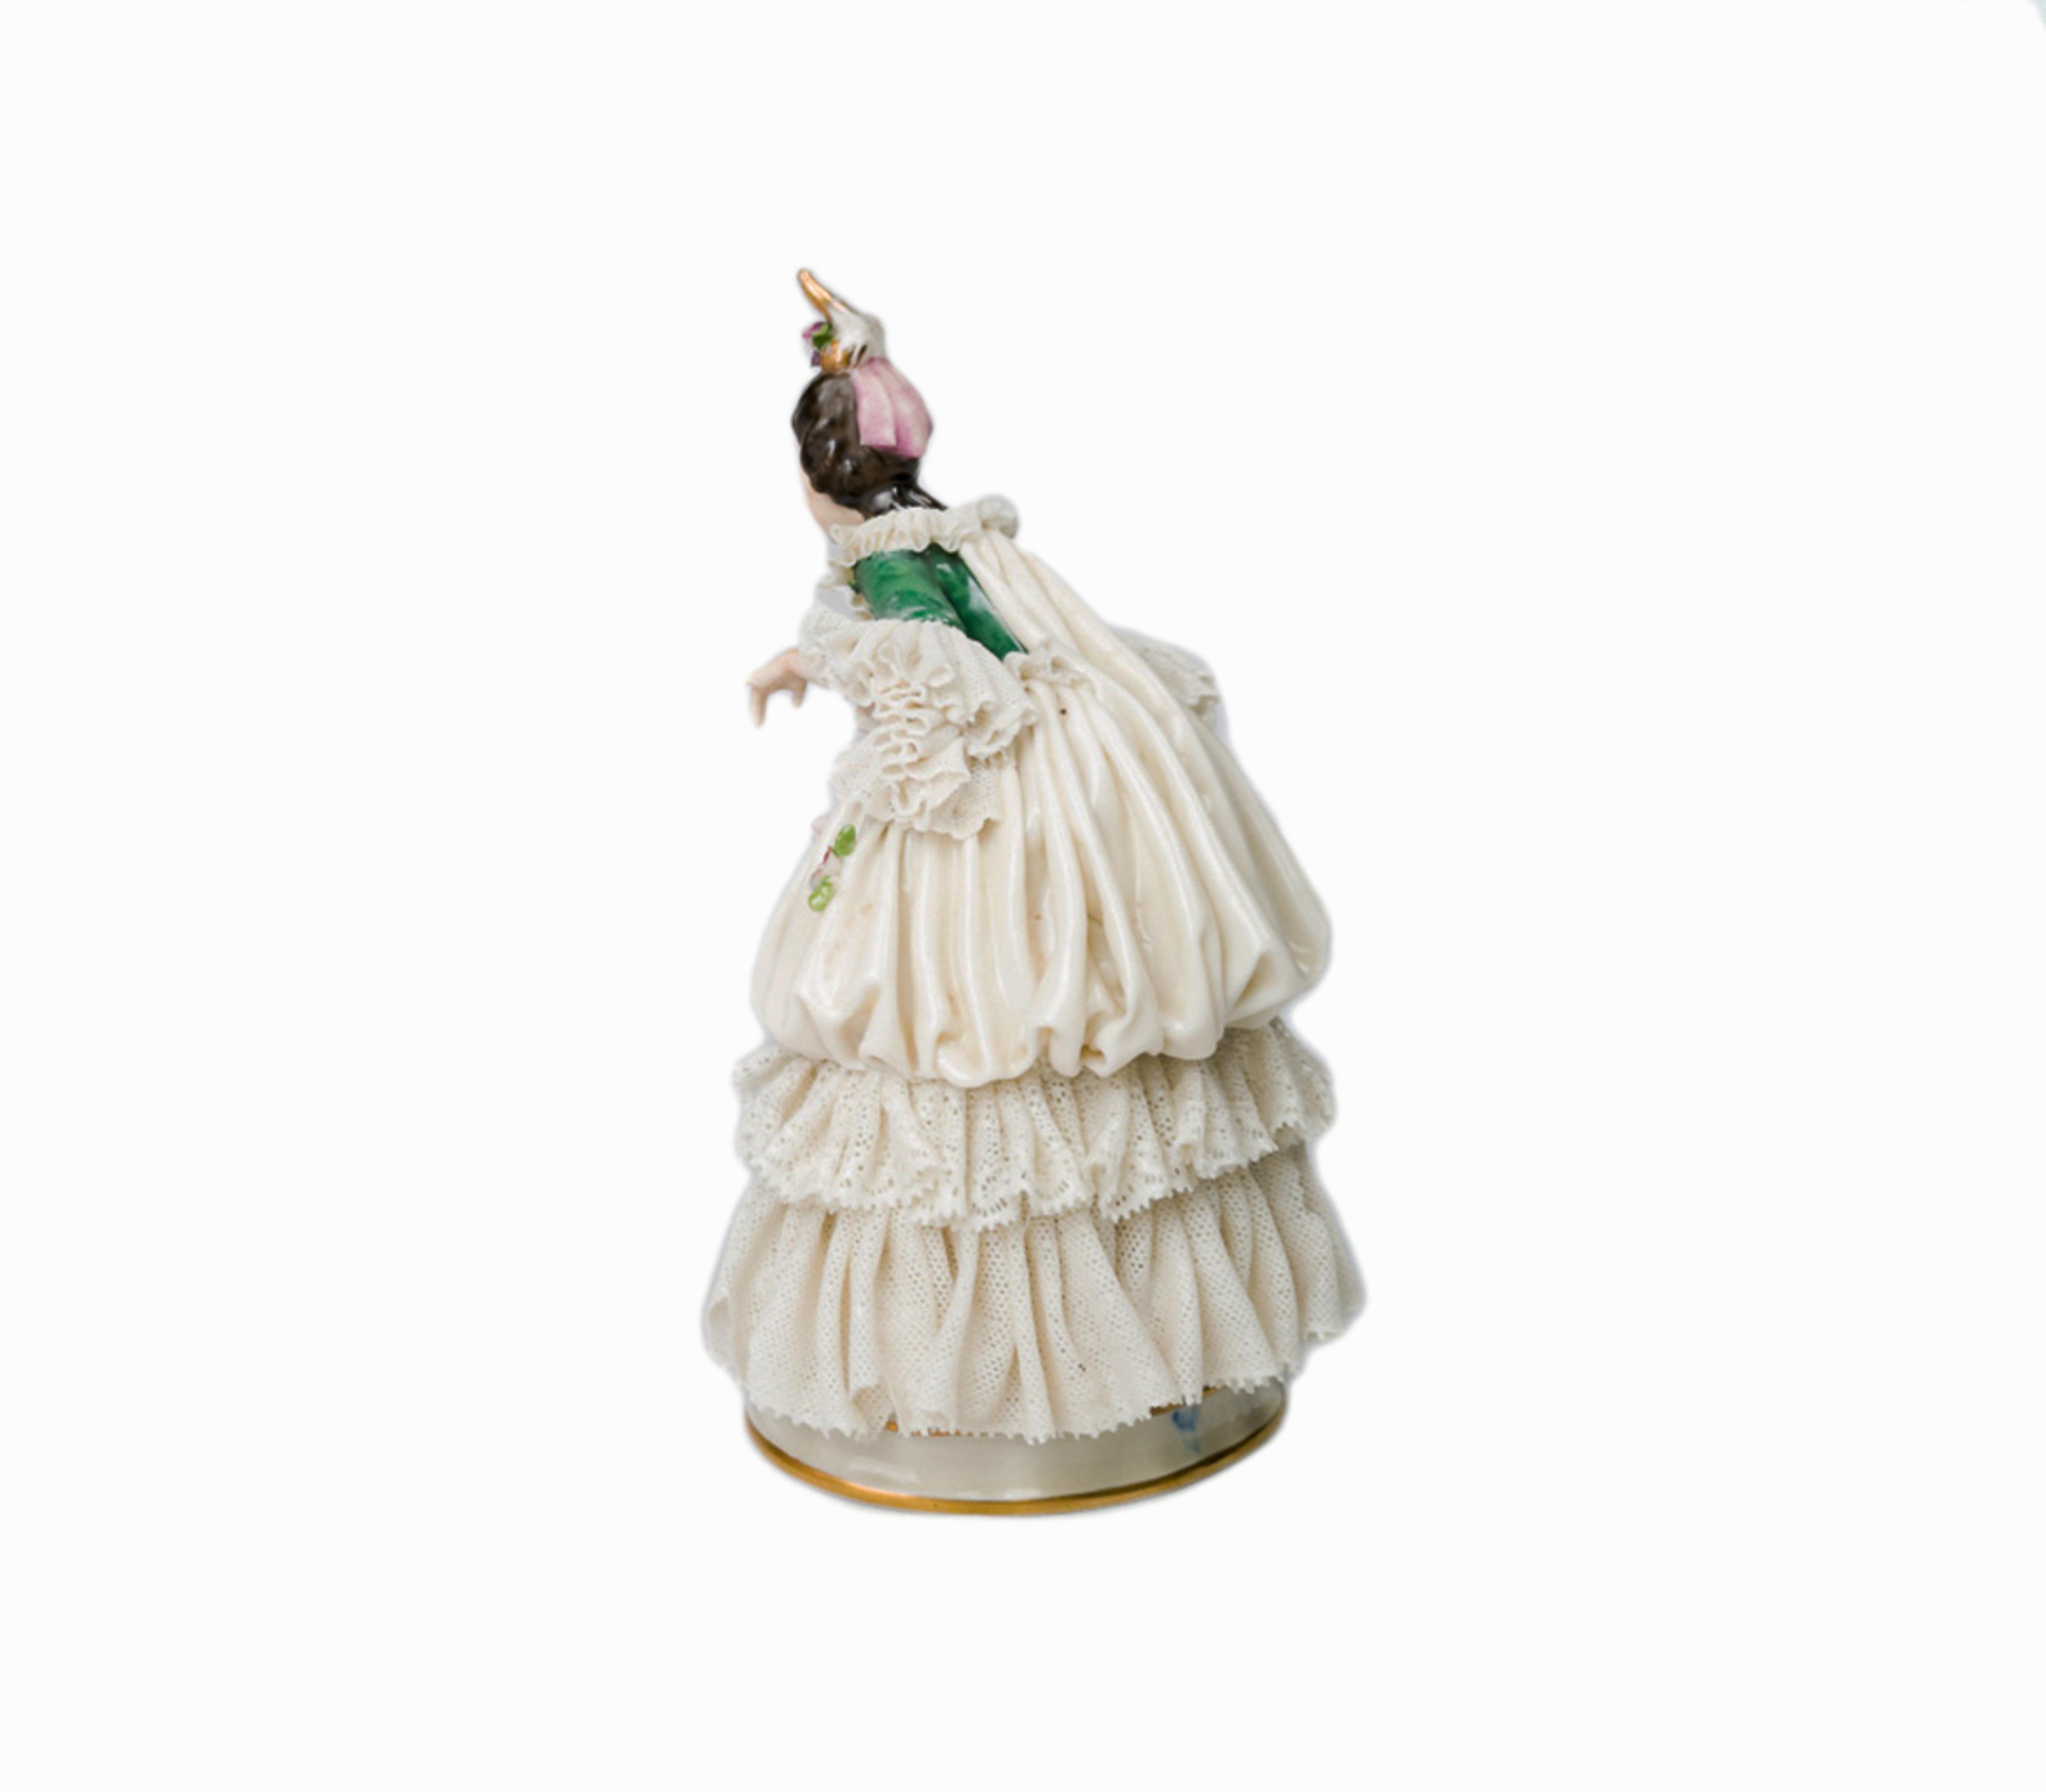 A charming italian Capadimonte translucent soft-paste porcelain figurine of a baroque lady  with «N» and «203» marks on the base, as seen in the last photo